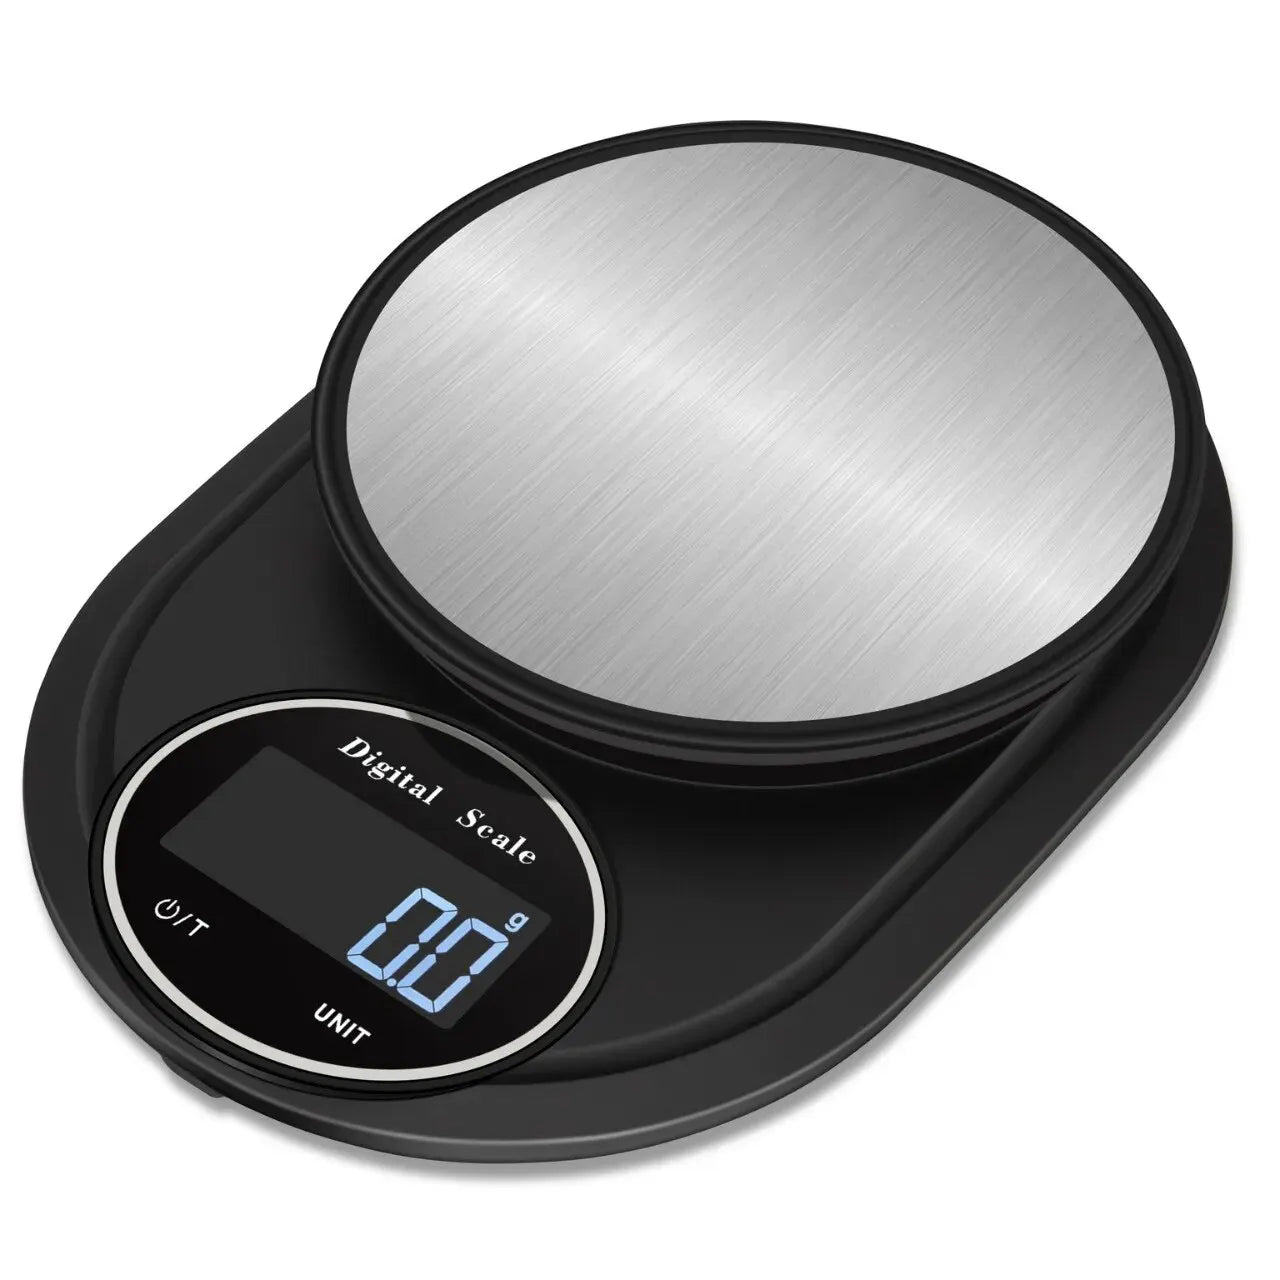 Compact Benchtop Food Scale - 0.1g Accuracy, LED Display, and Timer"